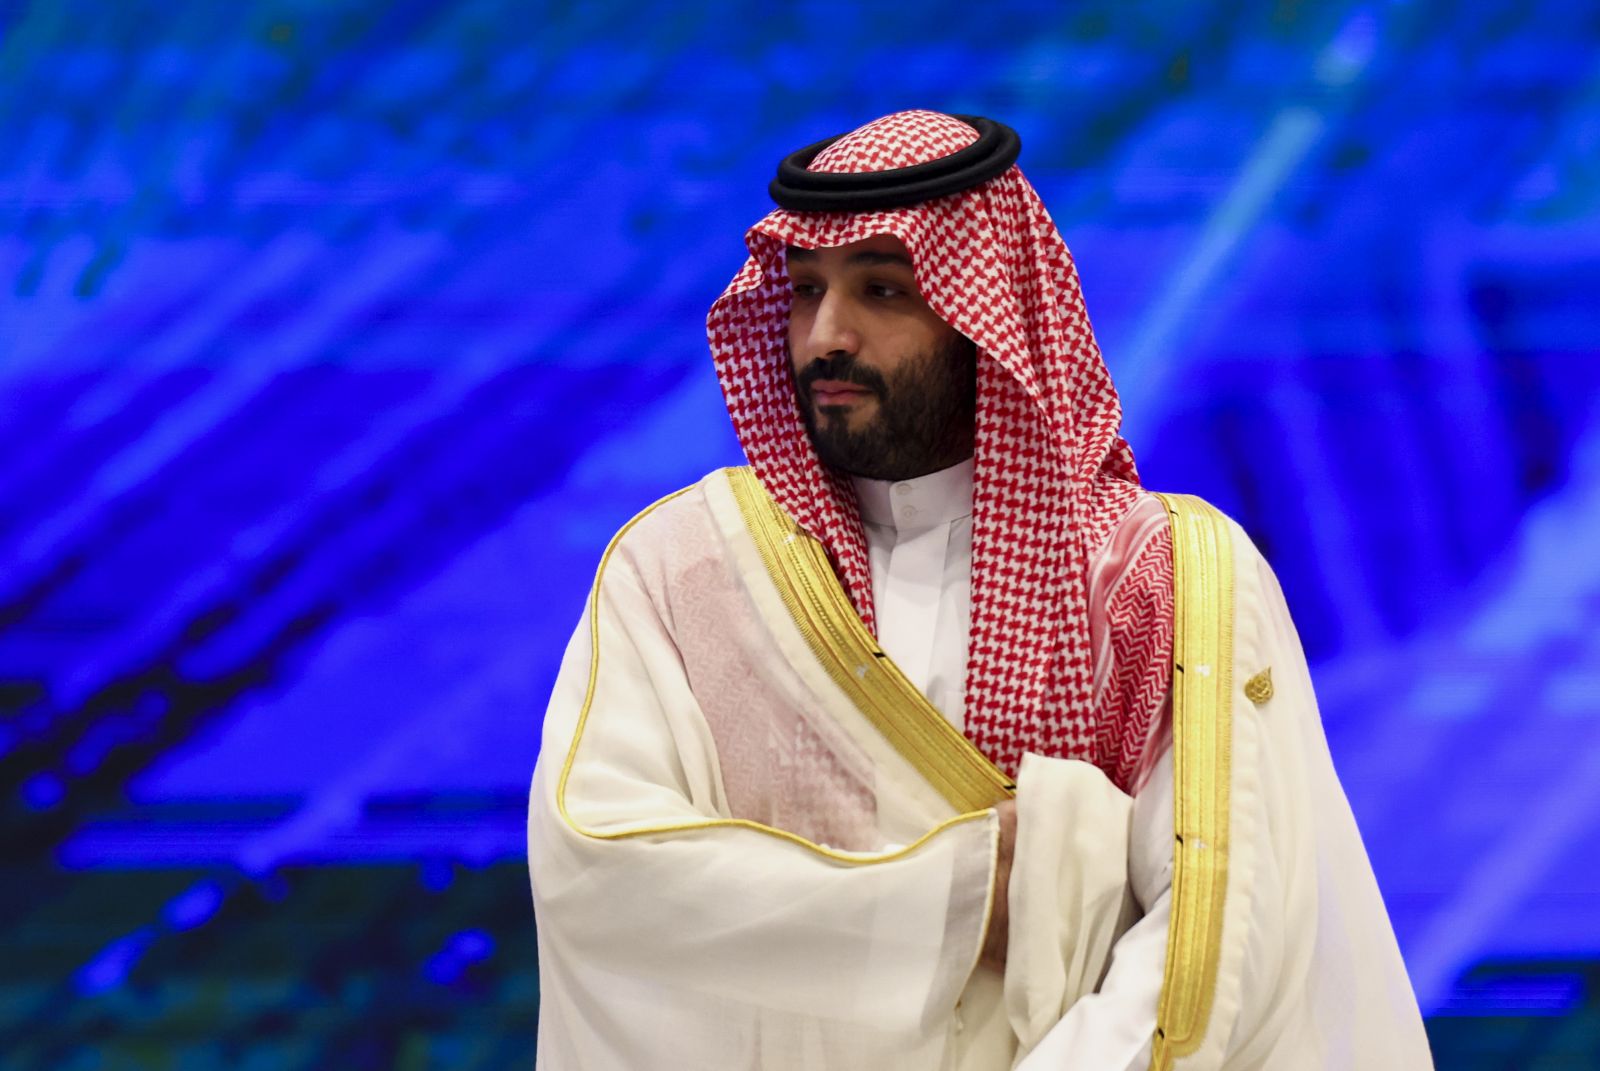 epa10312247 Saudi Crown Prince Mohammed bin Salman attends an APEC Leader's Informal Dialogue with Guests during the Asia-Pacific Economic Cooperation (APEC) Summit 2022, in Bangkok, Thailand, 18 November 2022.  EPA/ATHIT PERAWONGMETHA / POOL